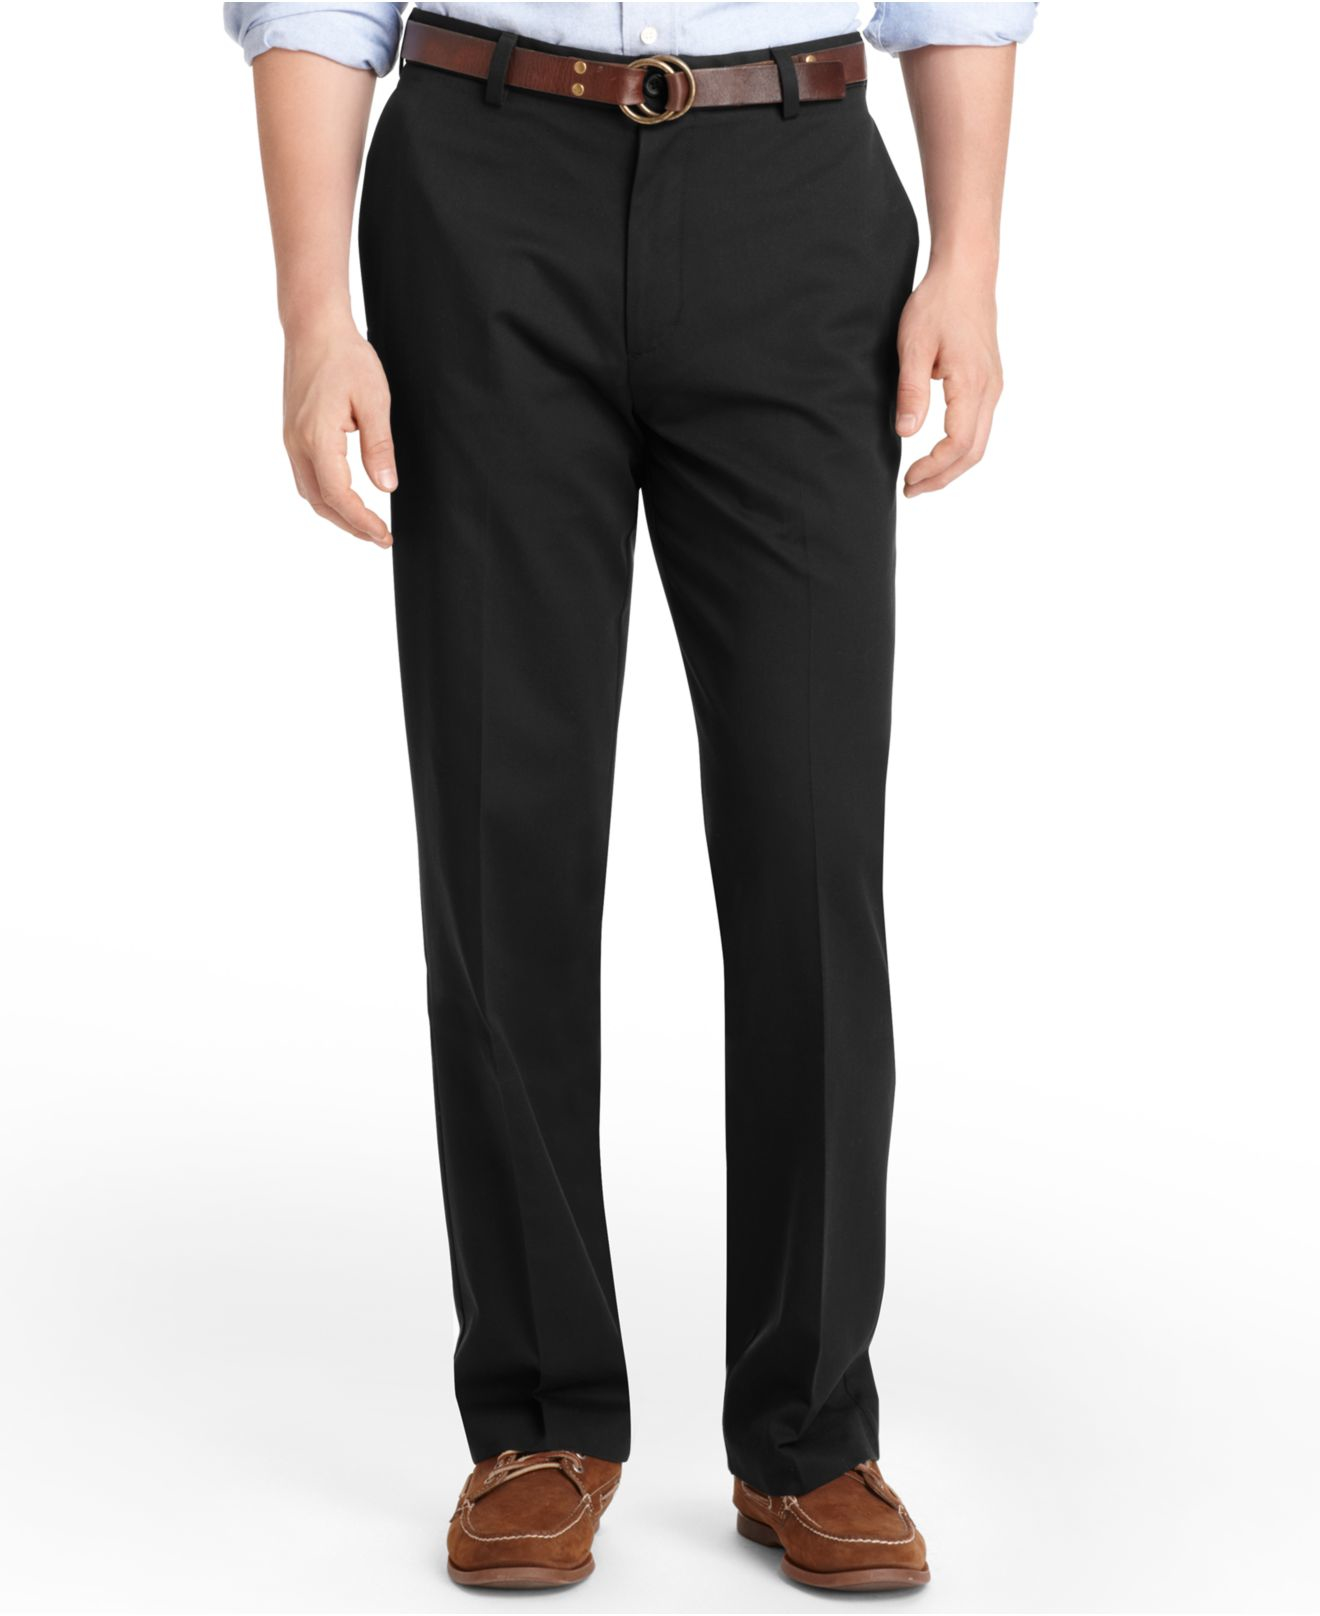 Izod Cotton Madison Classic Fit No-iron Flat Front Chino Pants in Black ...